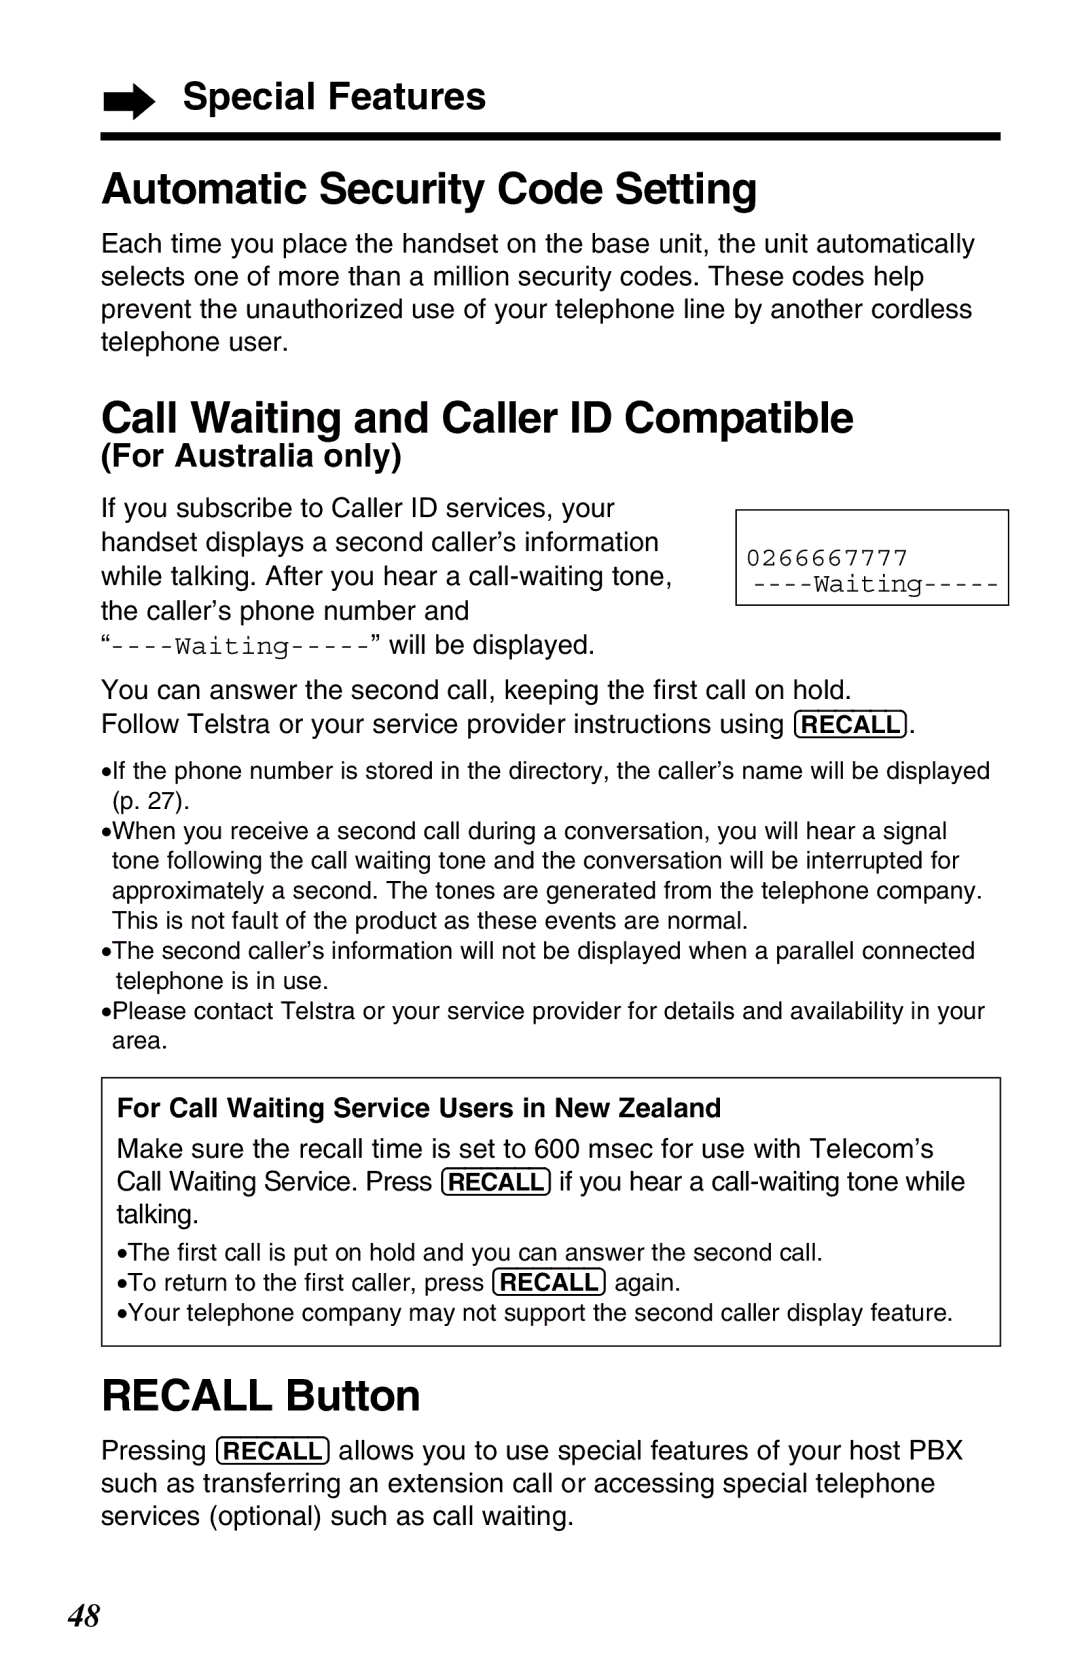 Panasonic KX-TC1220NZW Automatic Security Code Setting, Call Waiting and Caller ID Compatible, Recall Button 